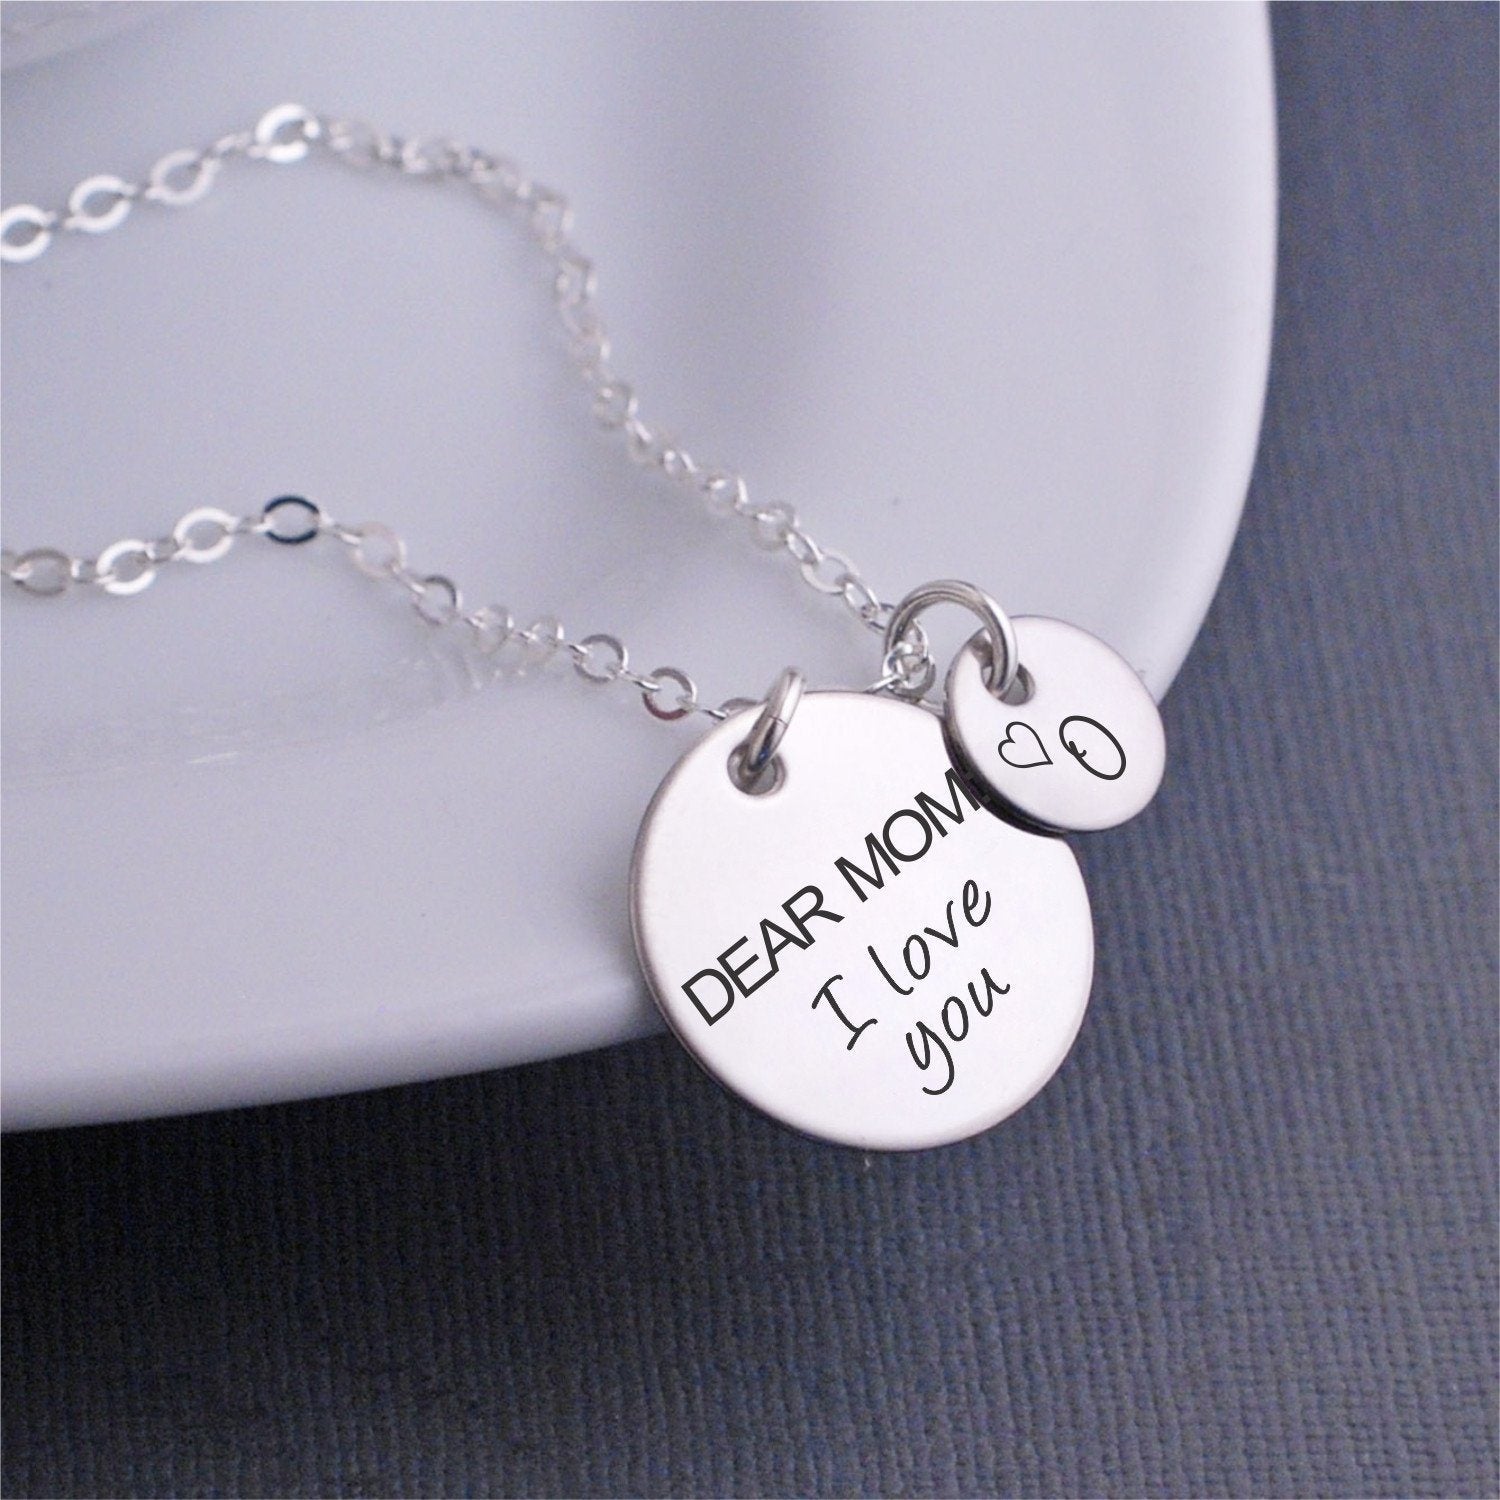 Personalised Silver Heart Disc, Engraved Charm, Bag Charm, Message Disc,  Charm for Bag or Jewellery, Personalised Gift Tag, Handbag Charm